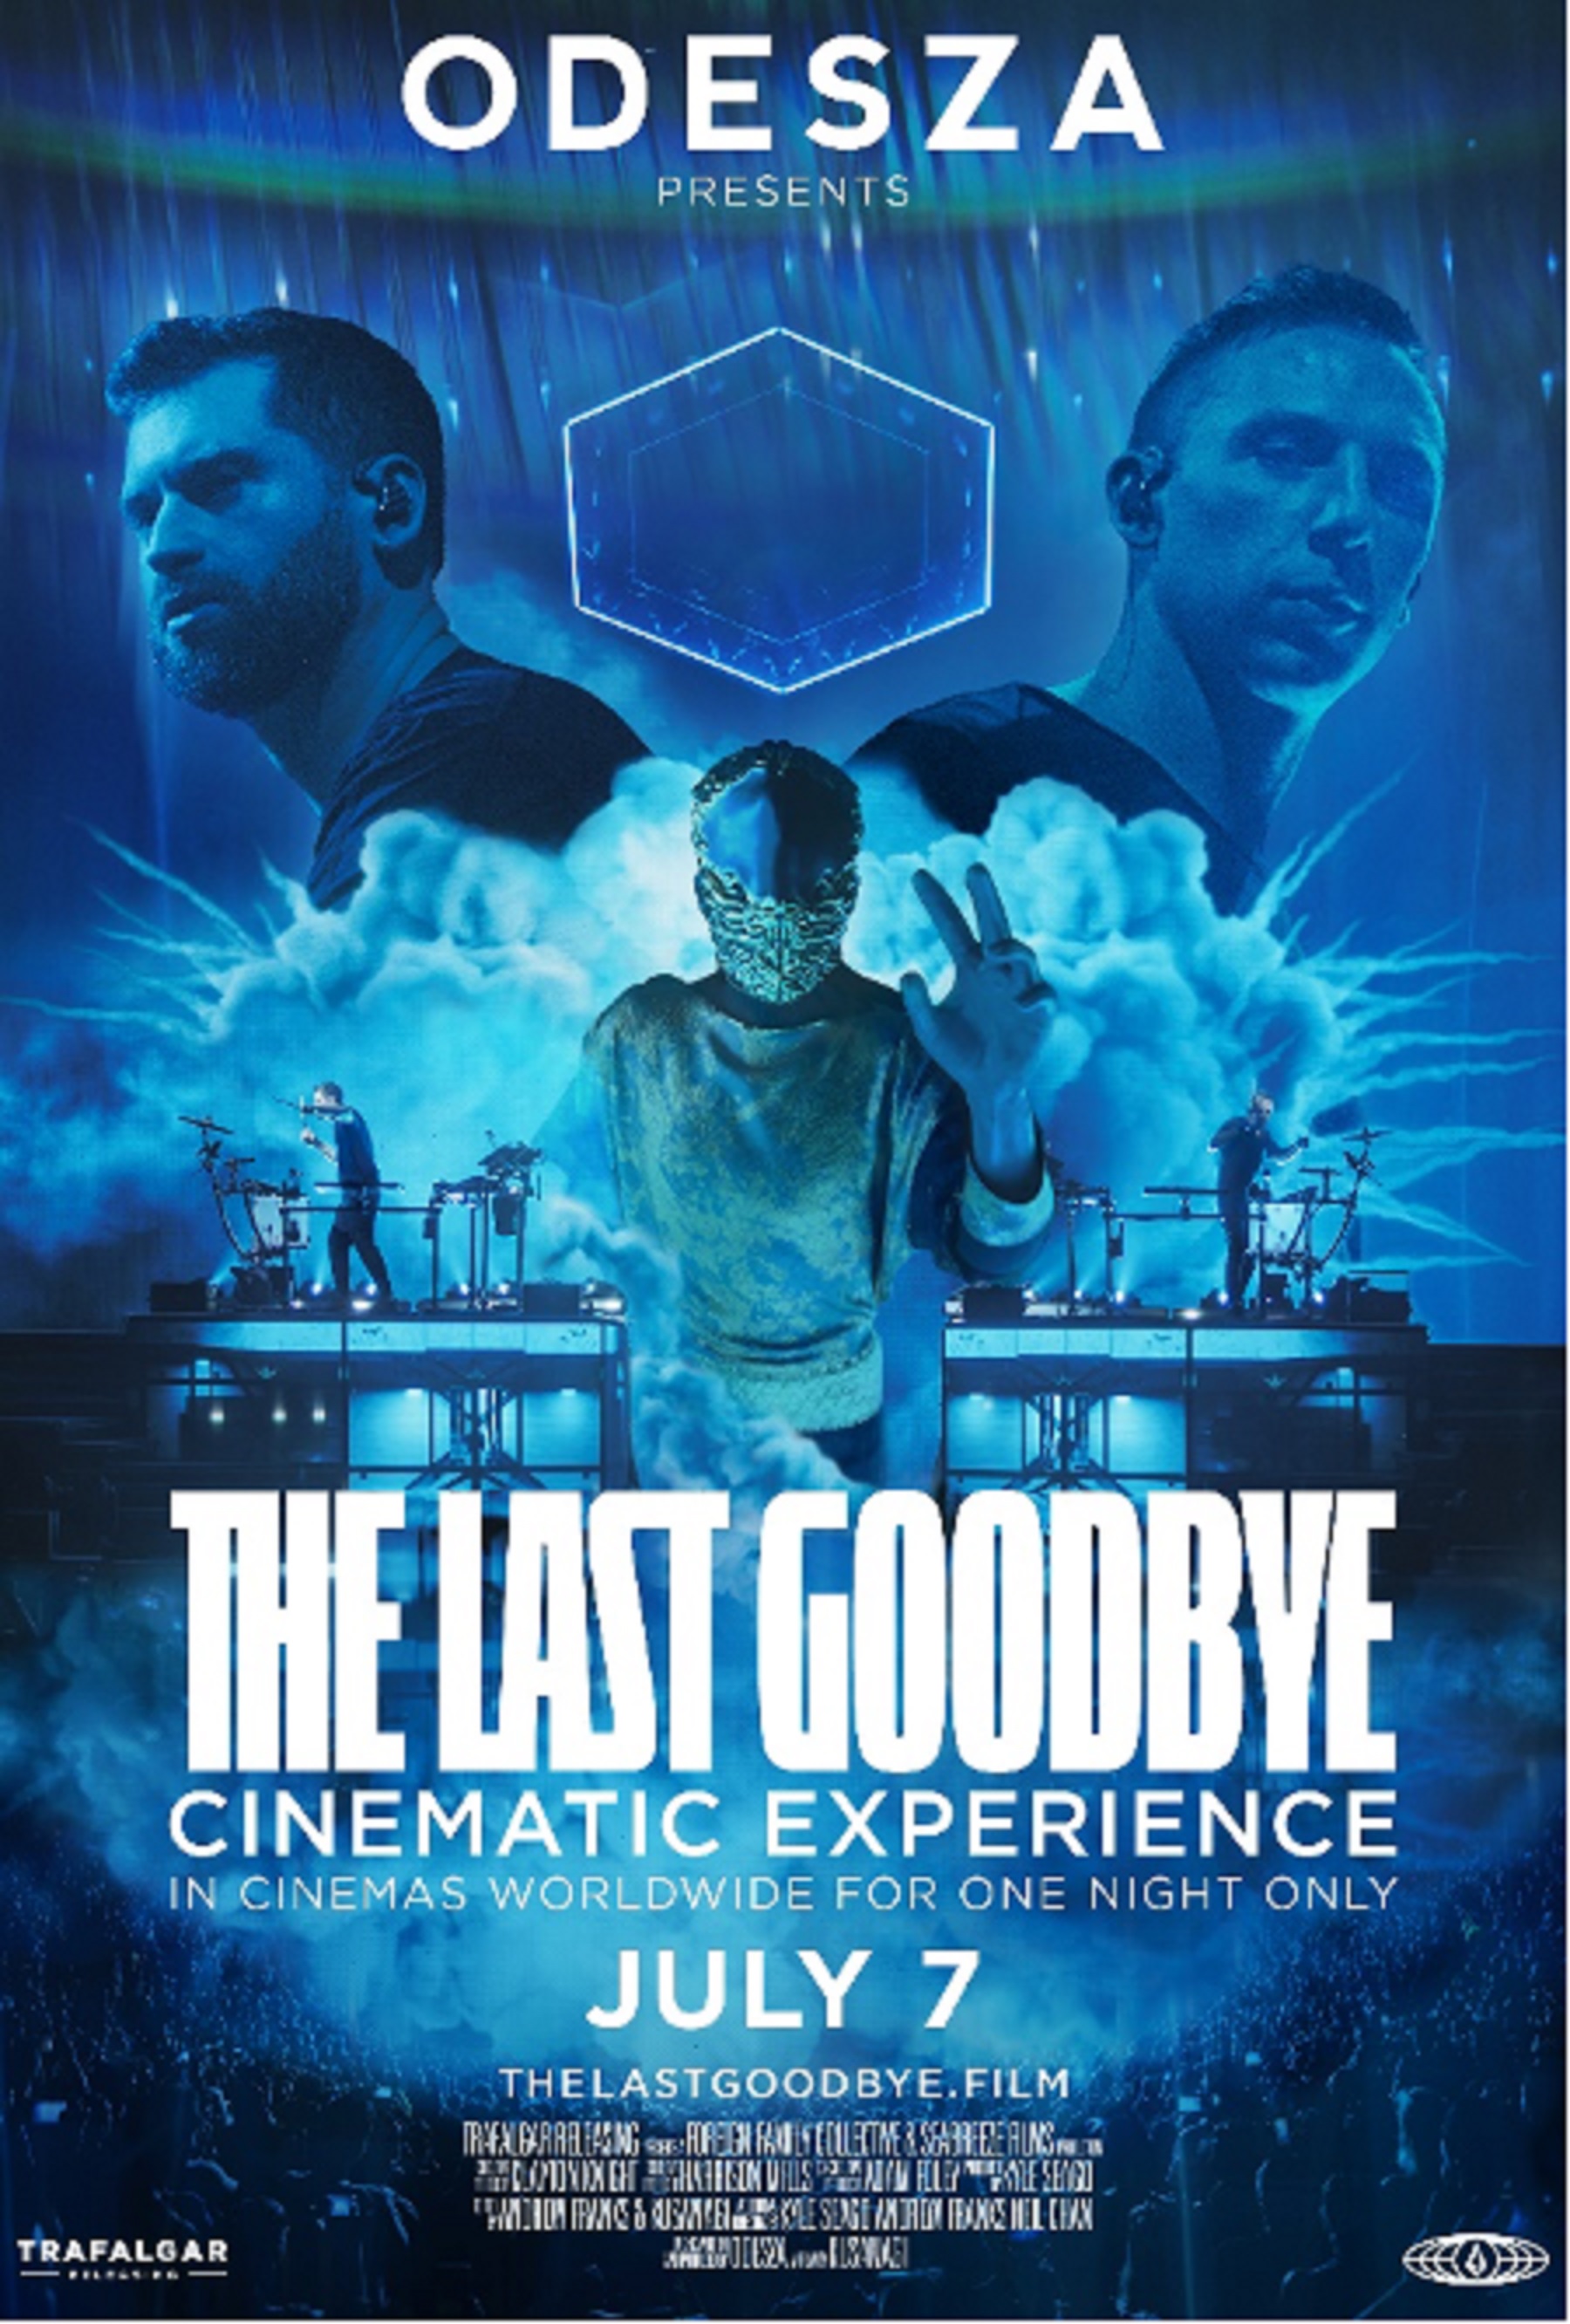 'ODESZA: 'The Last Goodbye Cinematic Experience' in cinemas worldwide Friday, July 7 for one night only